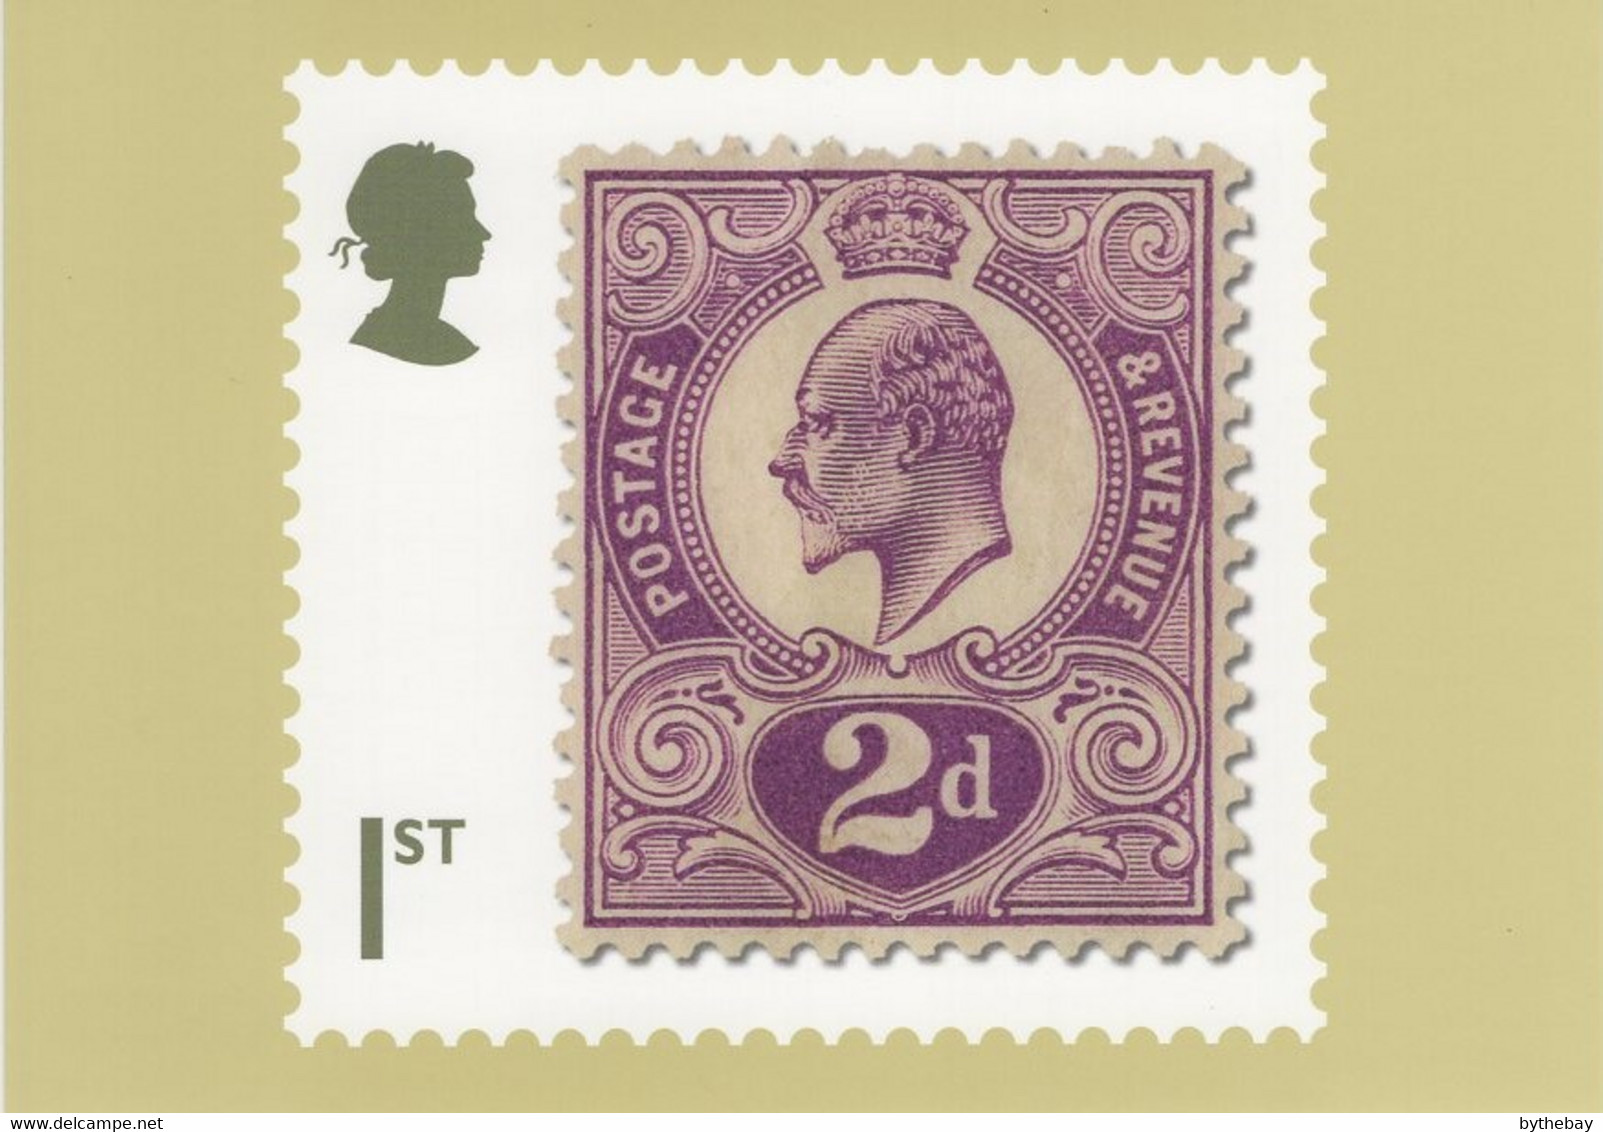 Great Britain 2019 PHQ Card Sc 3802b 1st 1p Edward VII Unissued Classic British Stamps - PHQ Karten